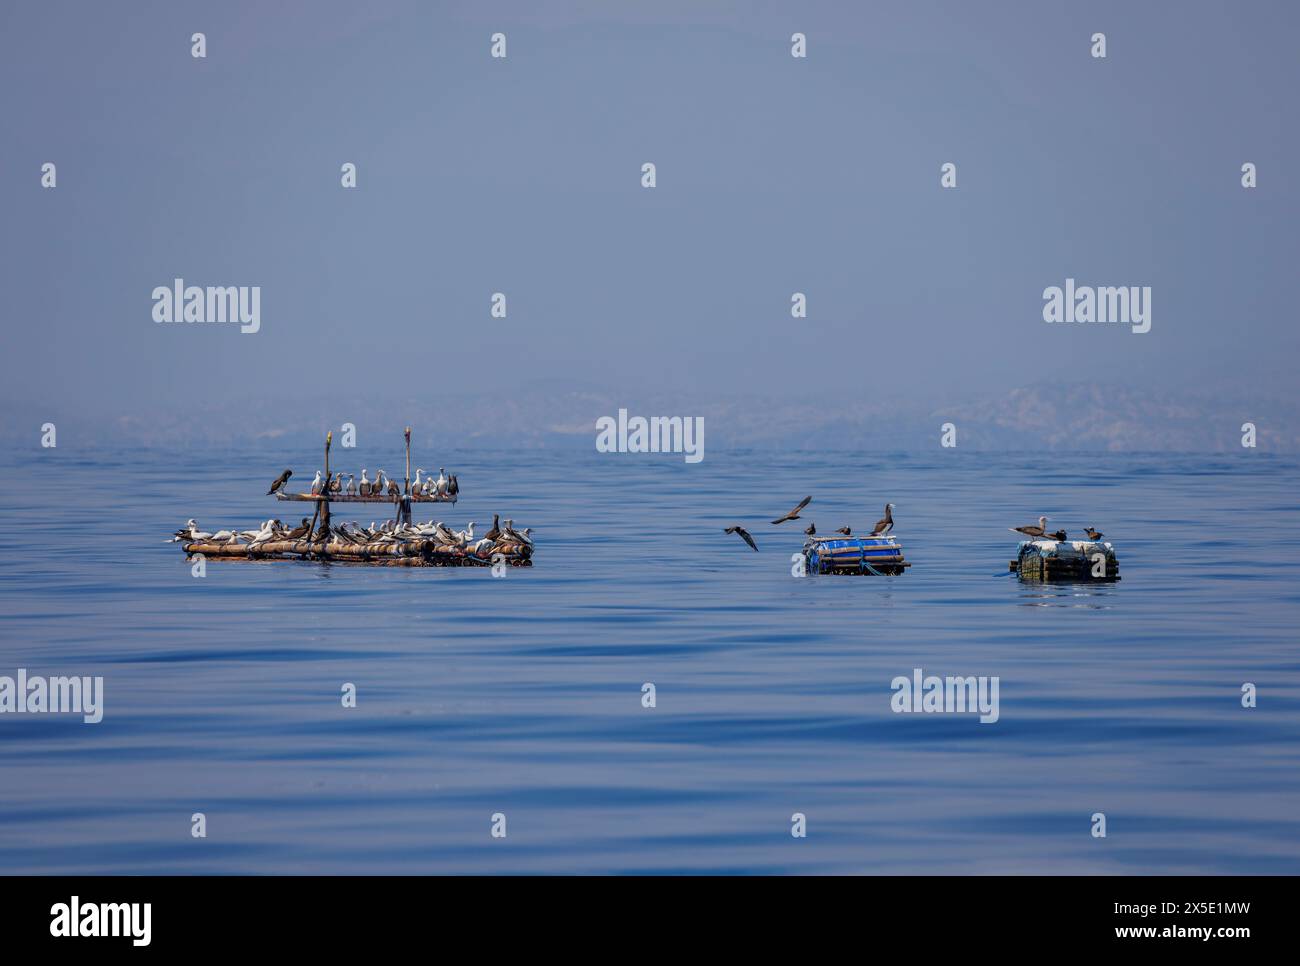 Various seabirds gather at a fish aggregating device deployed offshore by natives to aid in fishing off The Democratic Republic of Timor-Leste. Stock Photo